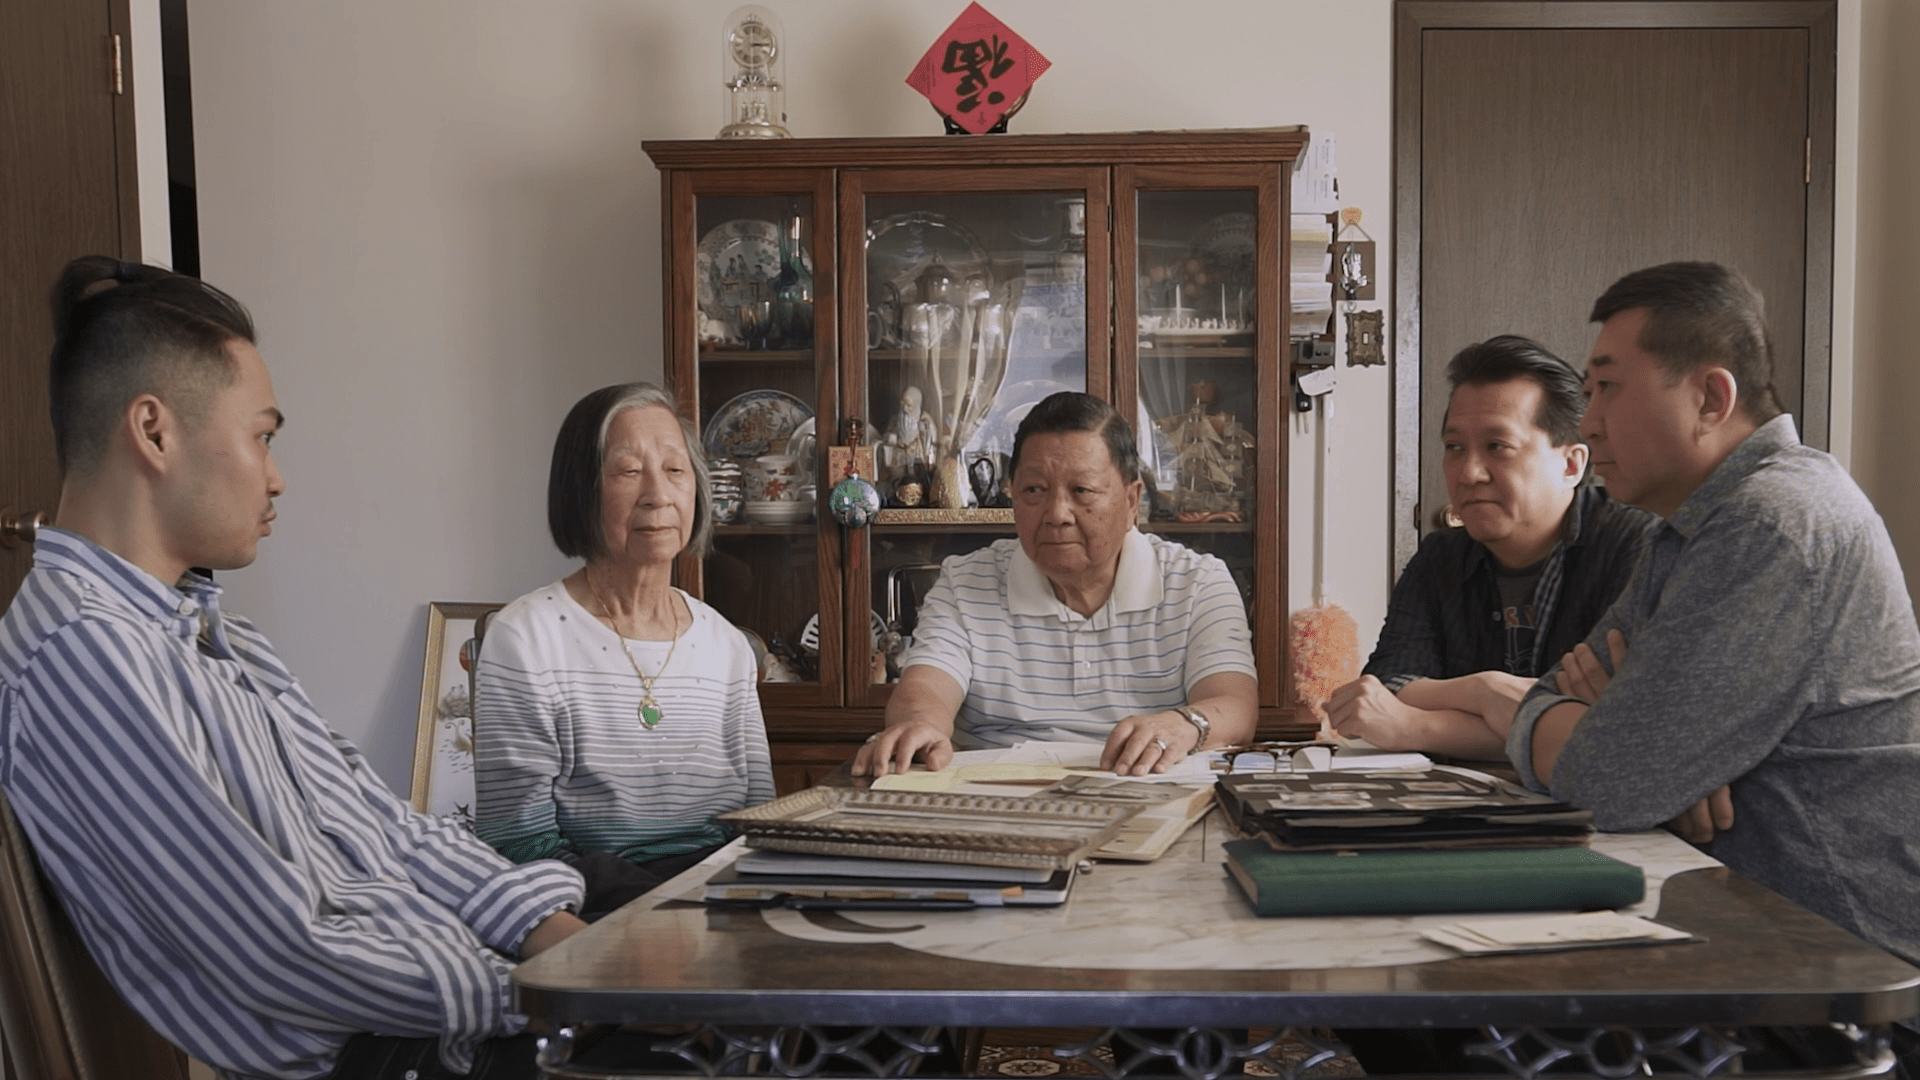 The Chow family and director Weiye Su seated around a dining table covered in photo albums.